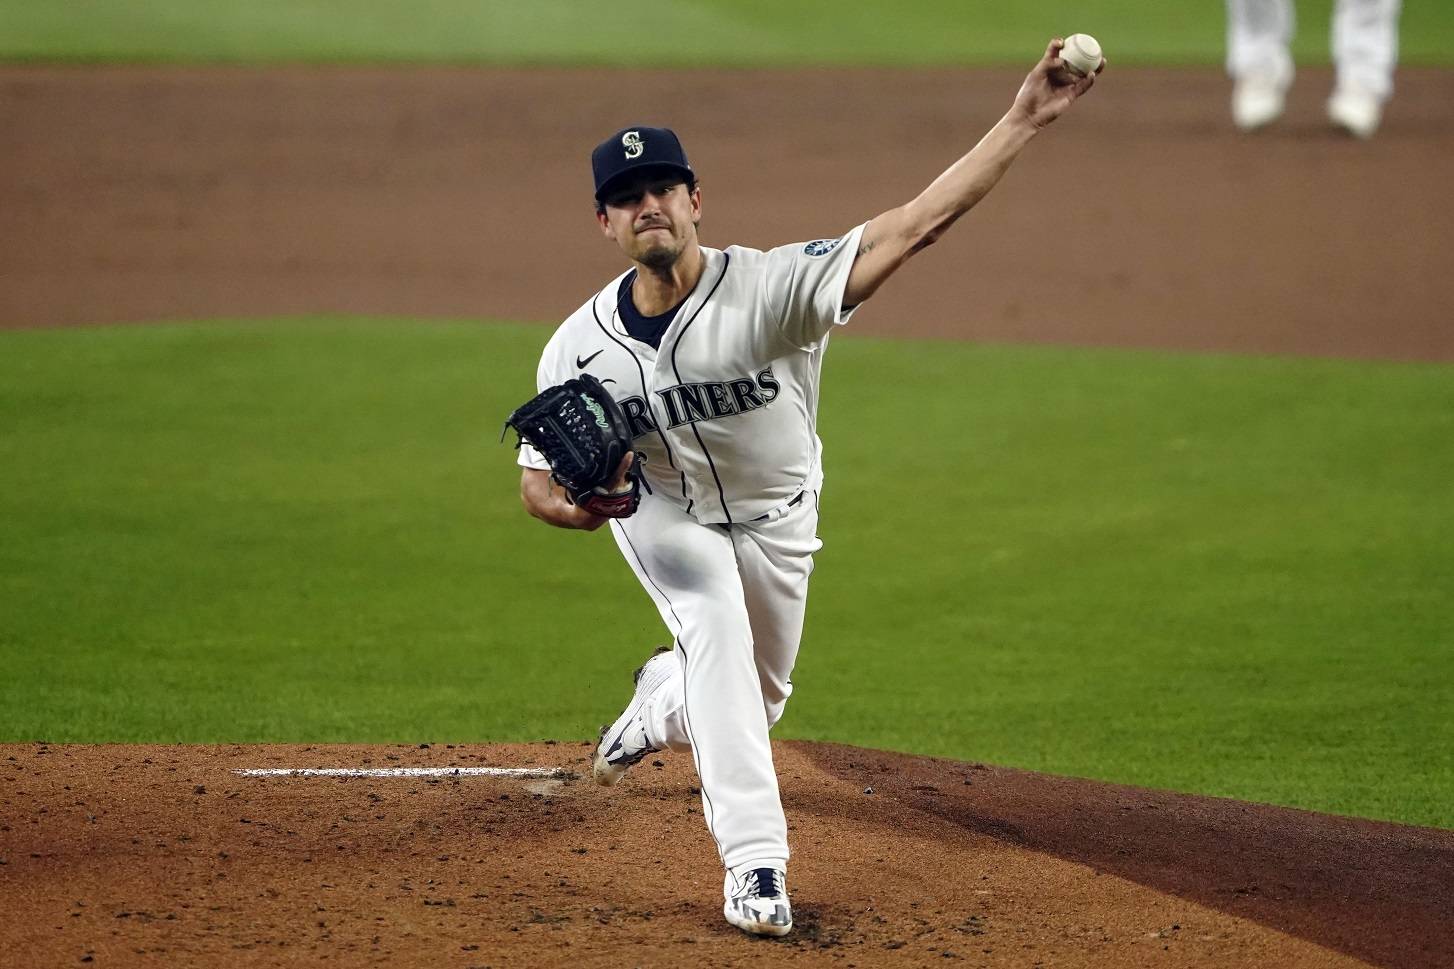 Seattle Mariners starting pitcher Marco Gonzales throws against the Oakland Athletics during the second inning of the first baseball game of a doubleheader Monday in Seattle. (Ted S. Warren/Associated Press)